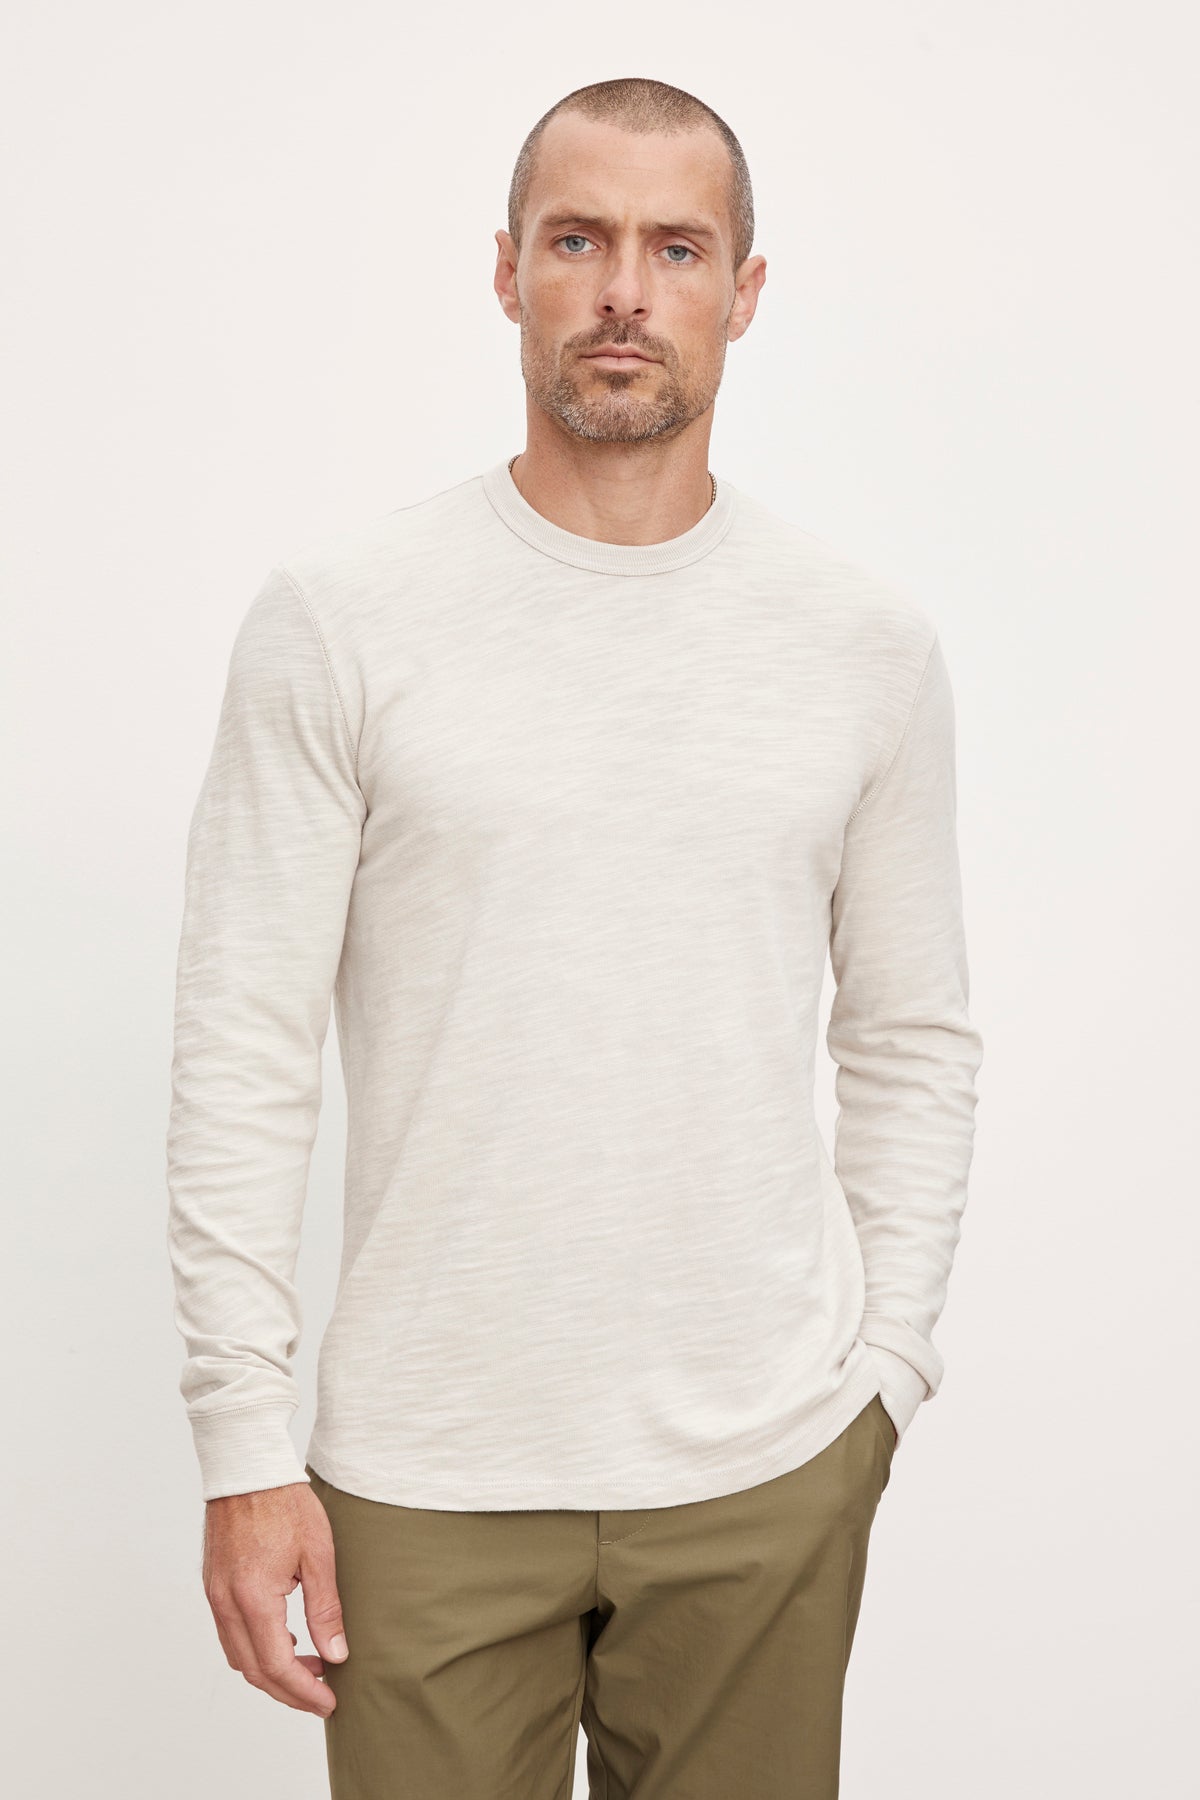 The man is wearing a Velvet by Graham & Spencer PALMER CREW NECK TEE.-36008977498305